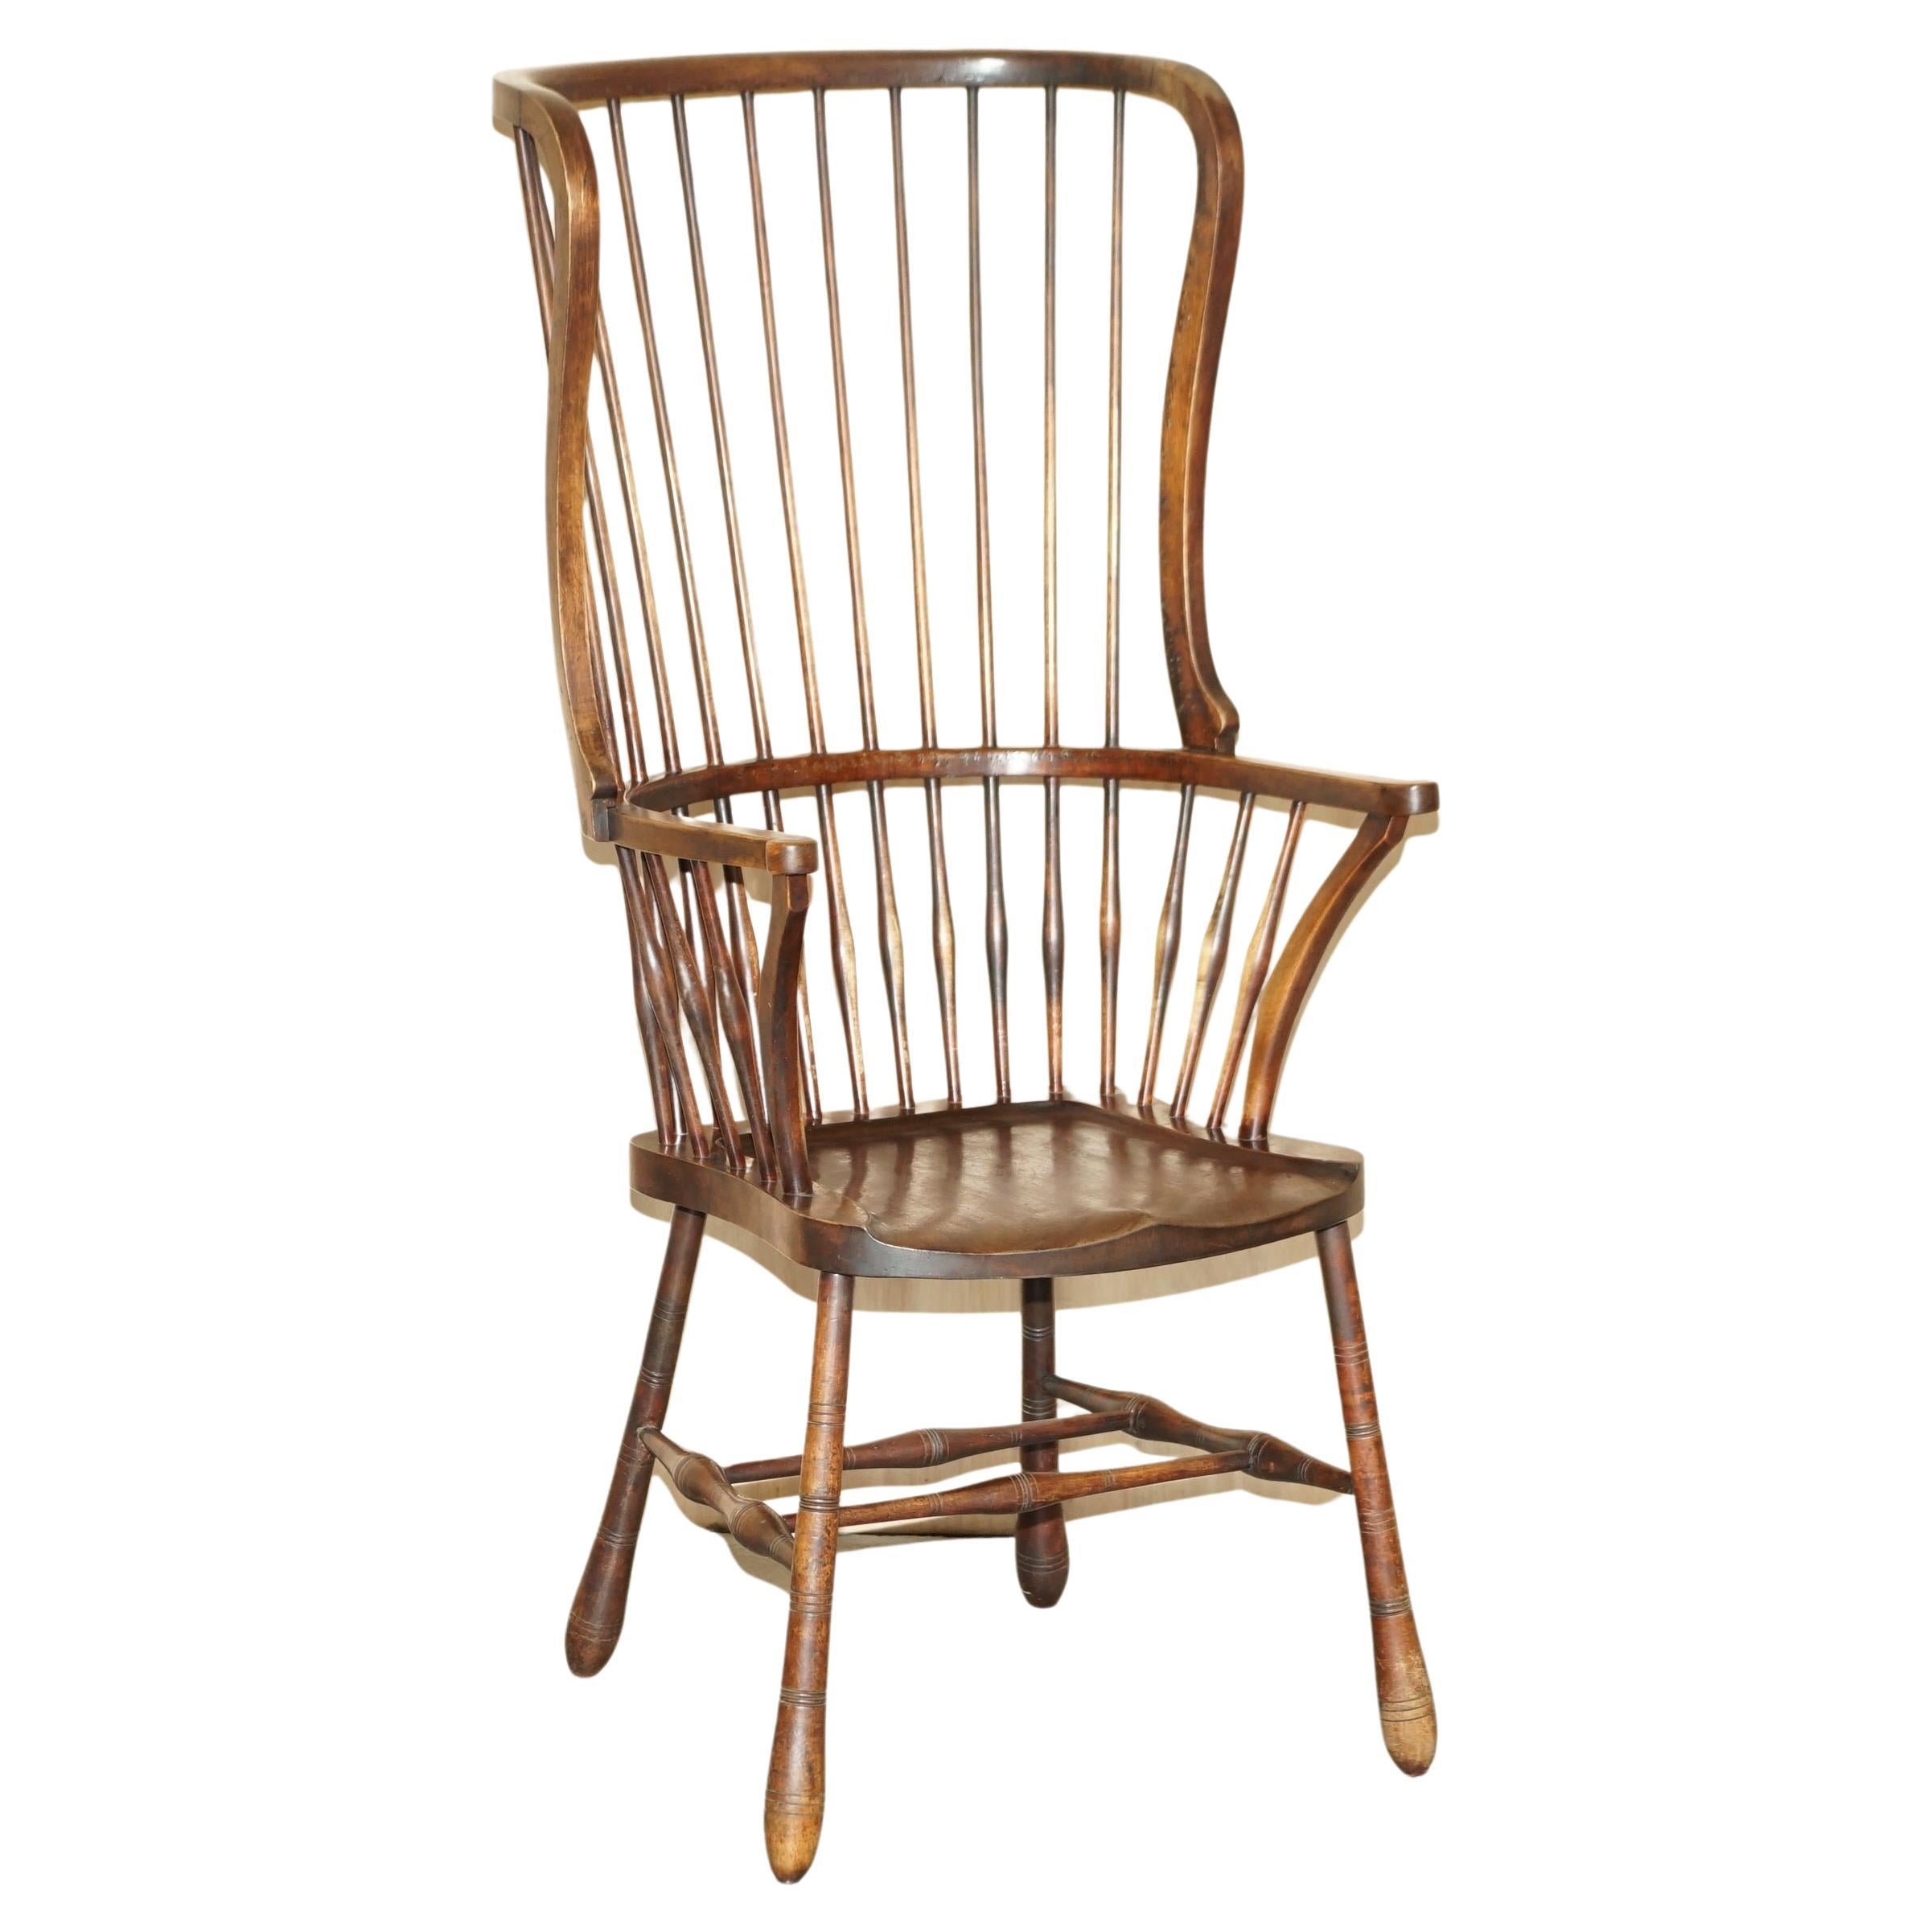 Very Rare and Important 19th Century Wingback Windsor Spindle Armchair in Ash For Sale